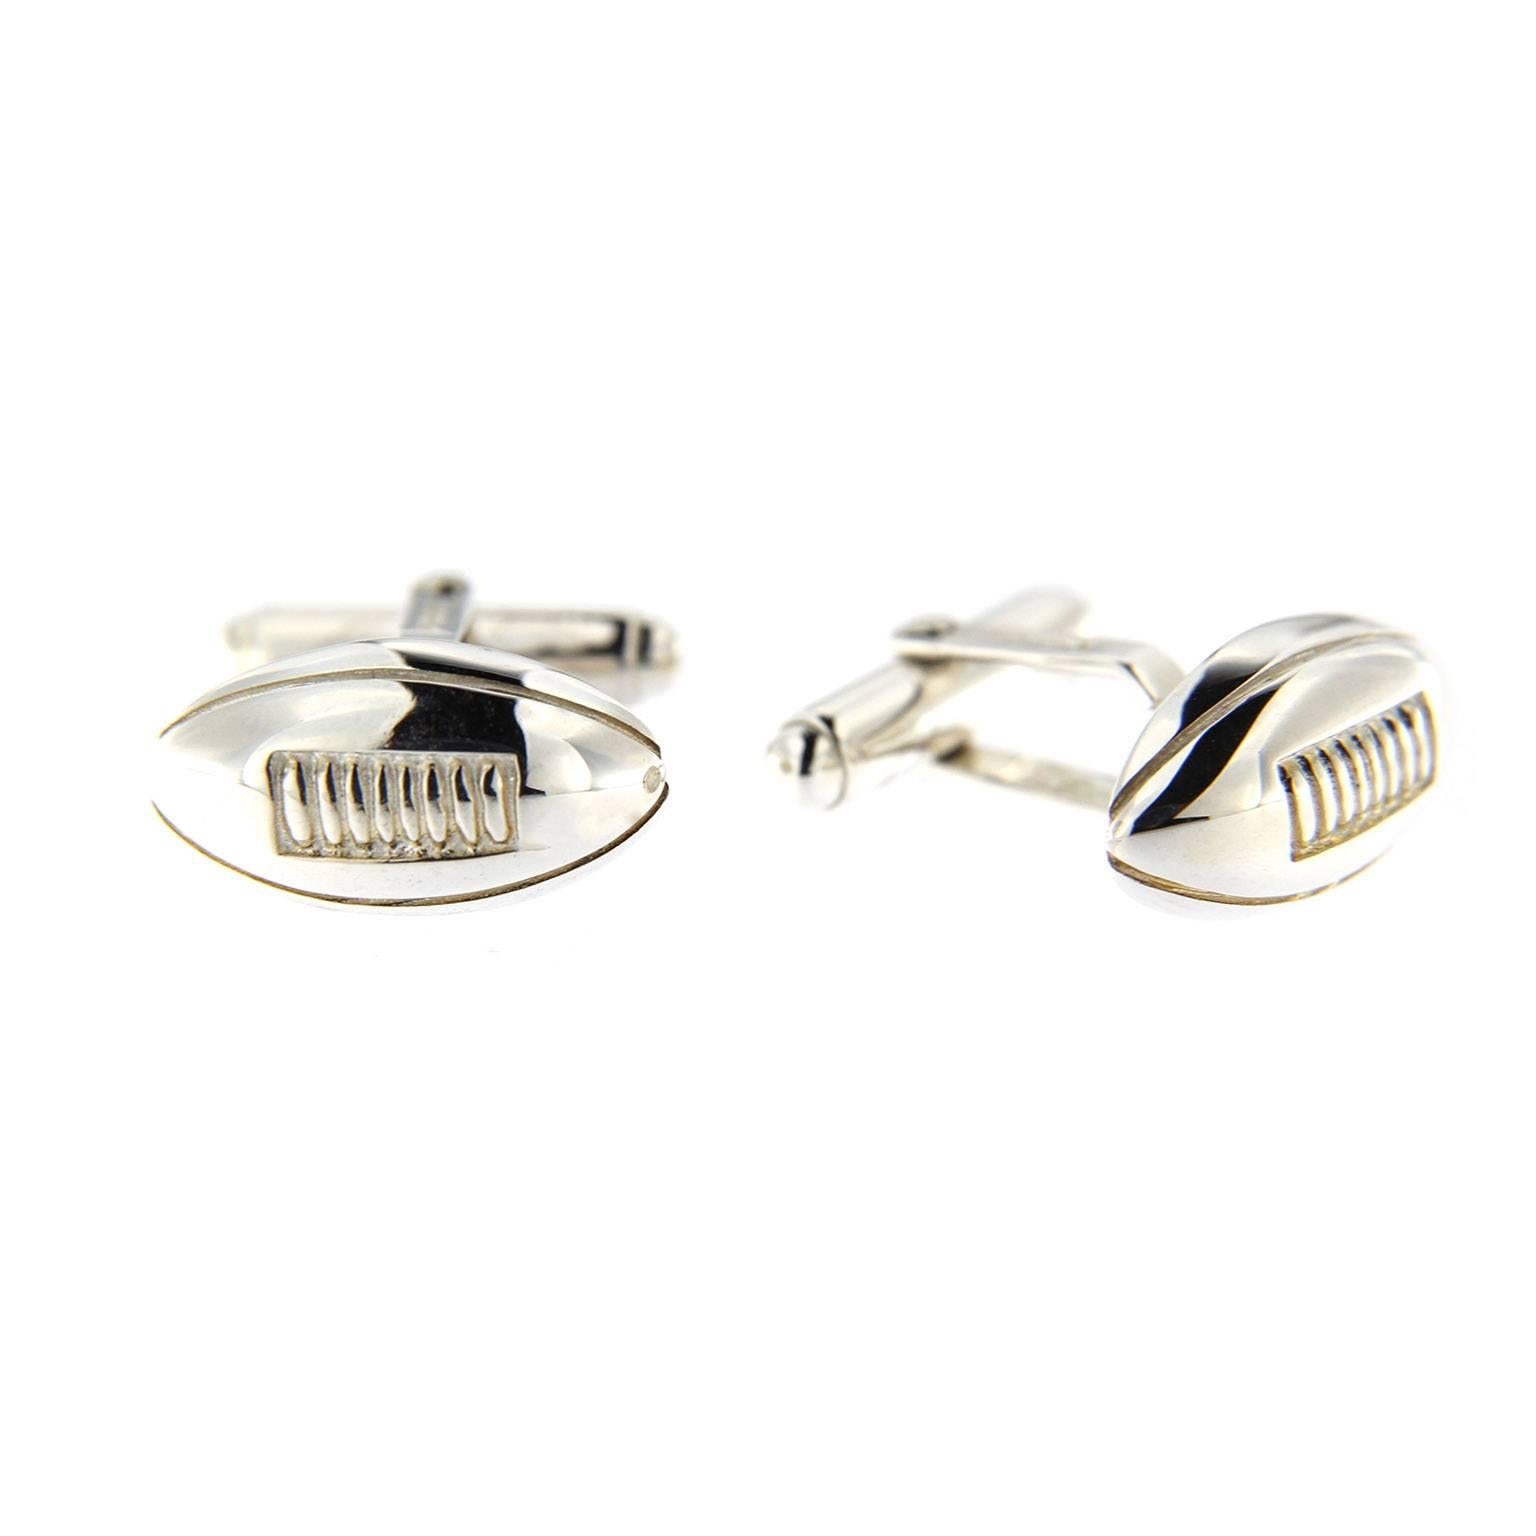 Jona design collection, hand crafted in Italy, rhodium plated sterling silver football cufflinks. Marked JONA 925.

All Jona jewelry is new and has never been previously owned or worn. Each item will arrive at your door beautifully gift wrapped in